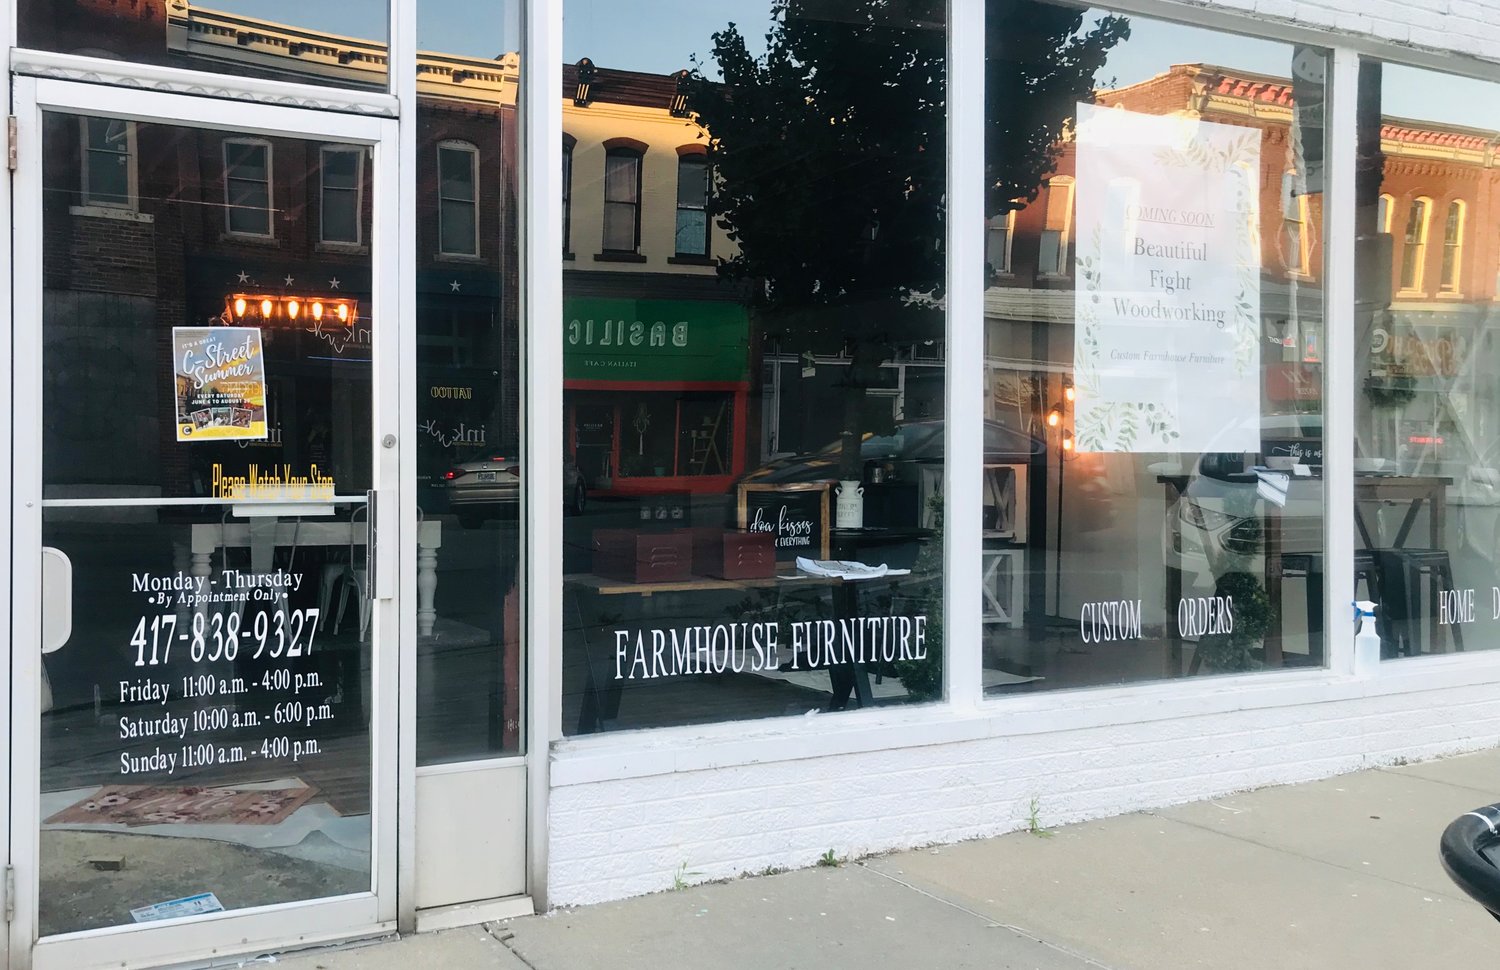 A retail shop for Beautiful Fight Woodworking is now open on Commercial Street.